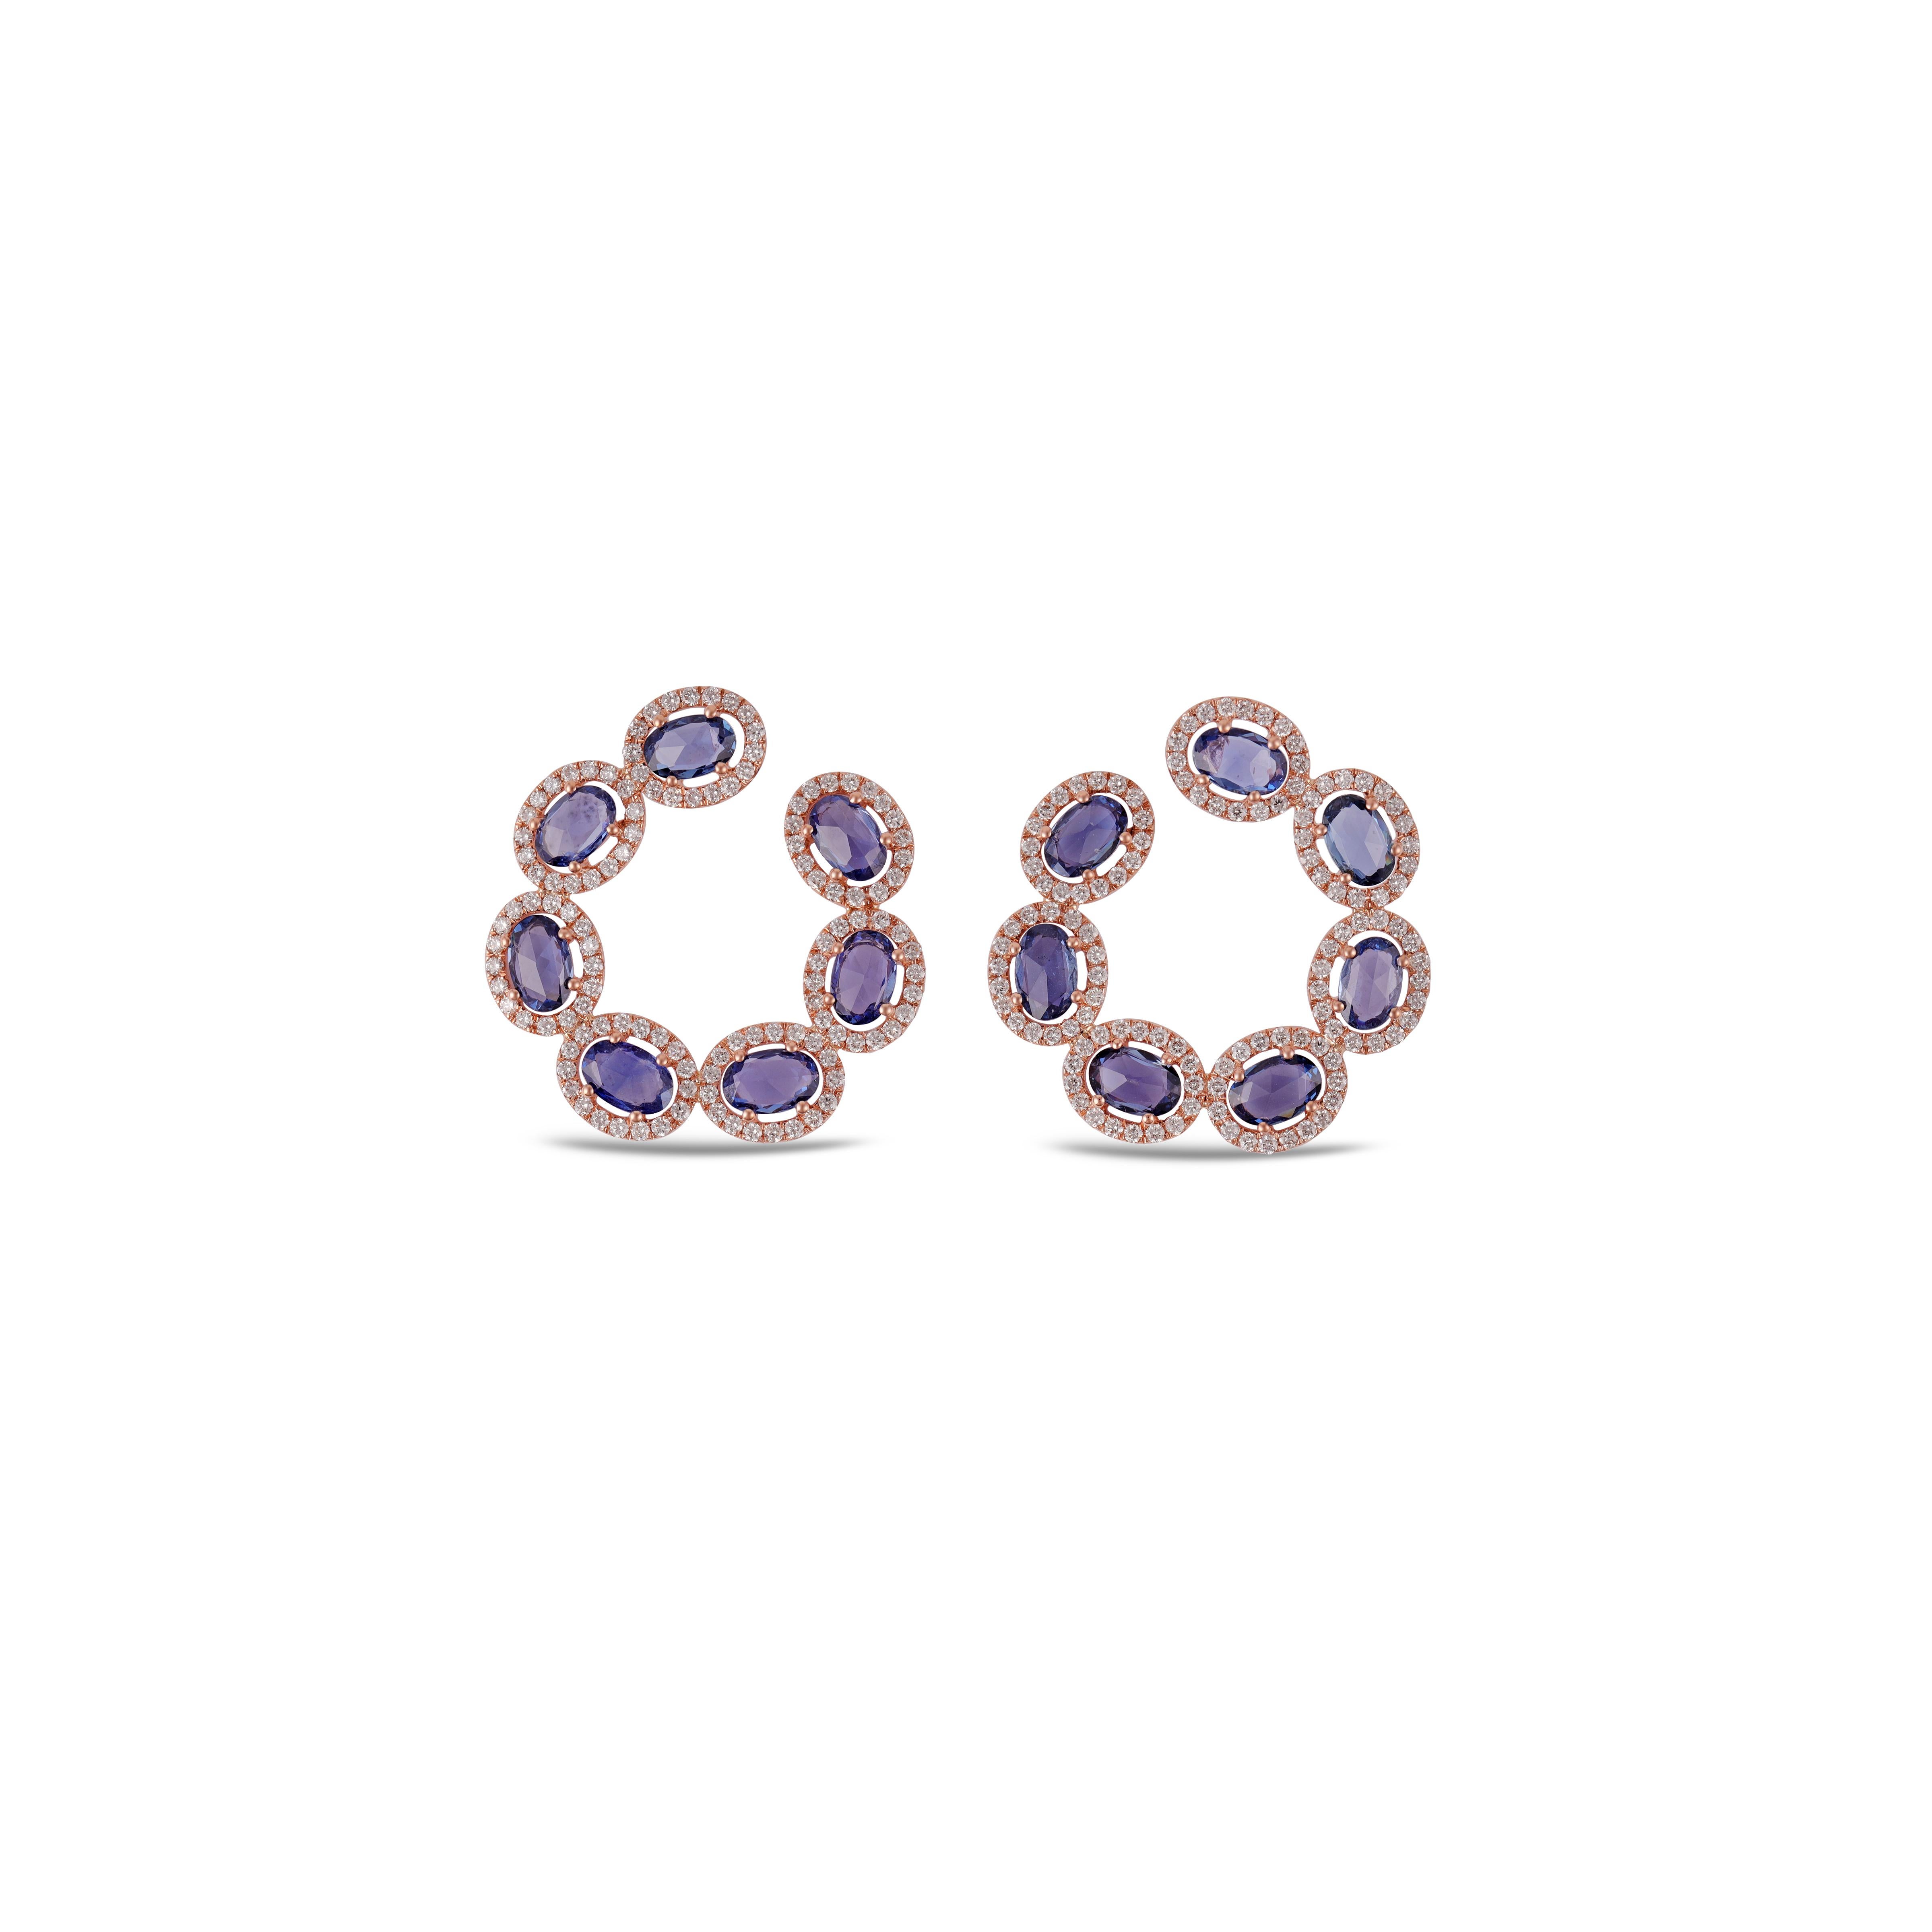 Blue Sapphire Rose Gold Diamond Earrings
Earring.

Blue Sapphire 6.25 Cts
Diamond 1.75 Cts


Custom Services
Resizing is available.
Request Customization
